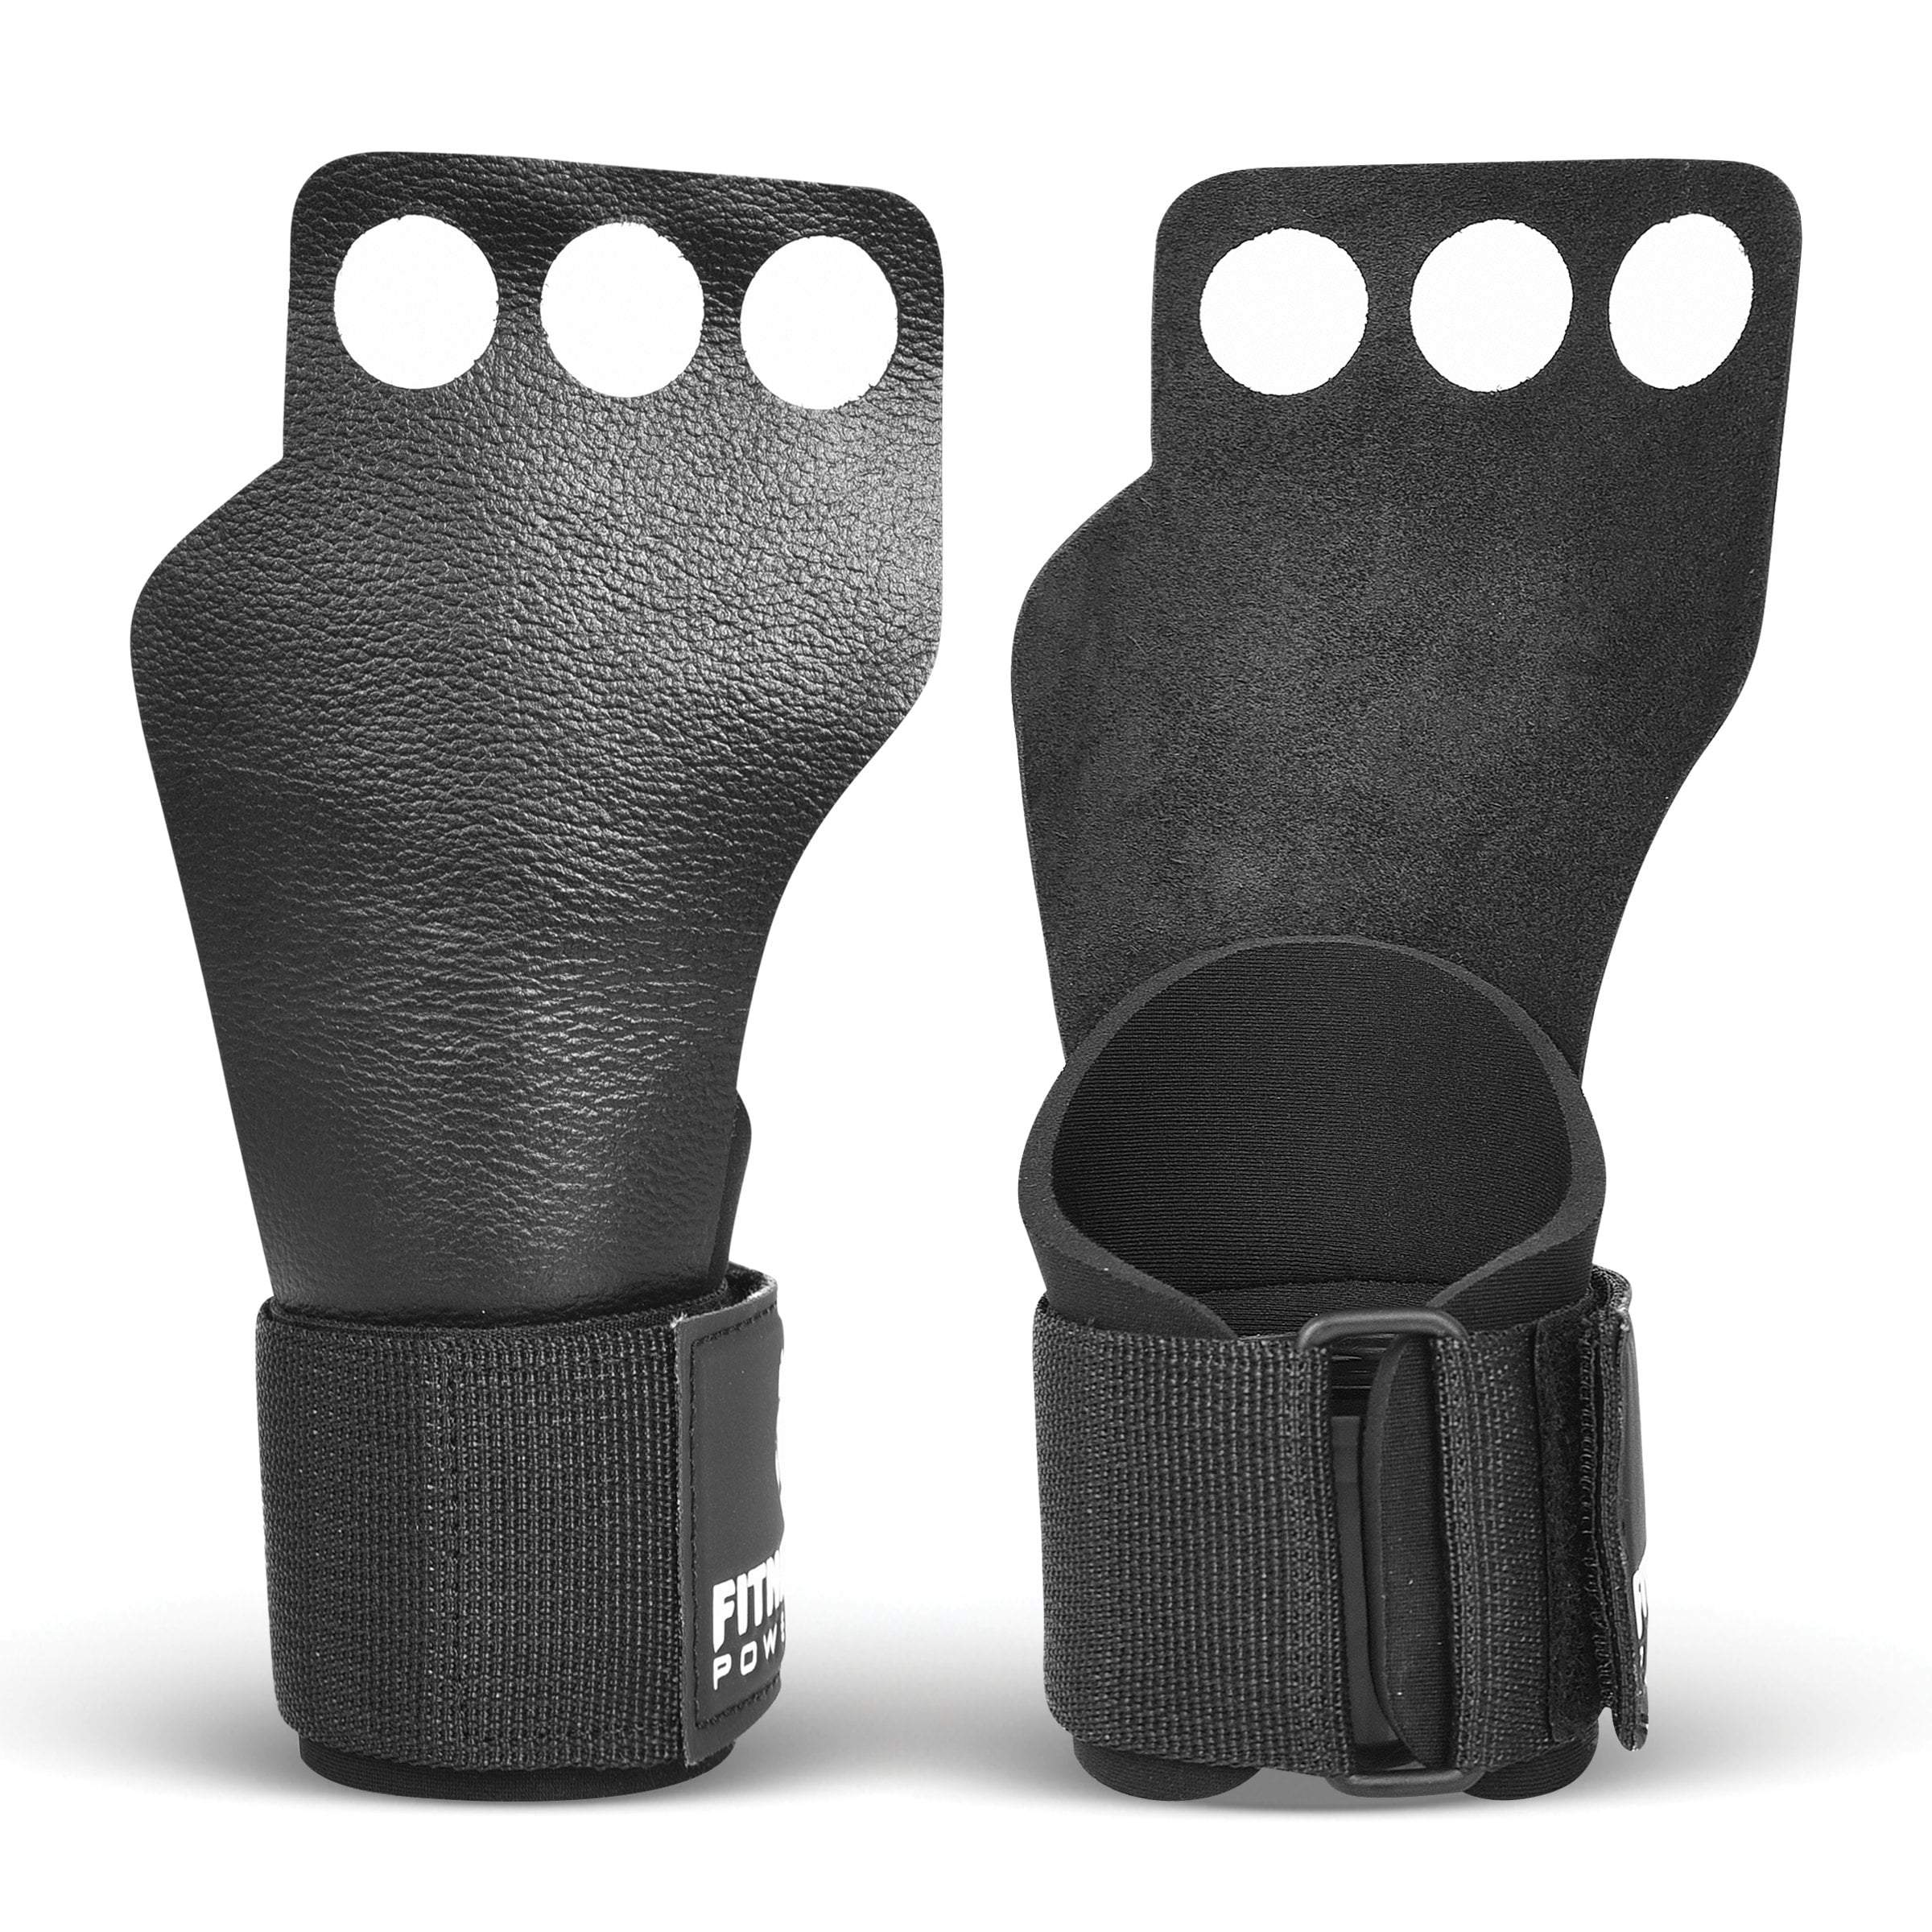 FITNESS FOX 3 Hole Leather Lifting Hand Grips for Weightlifting & CrossFit Training